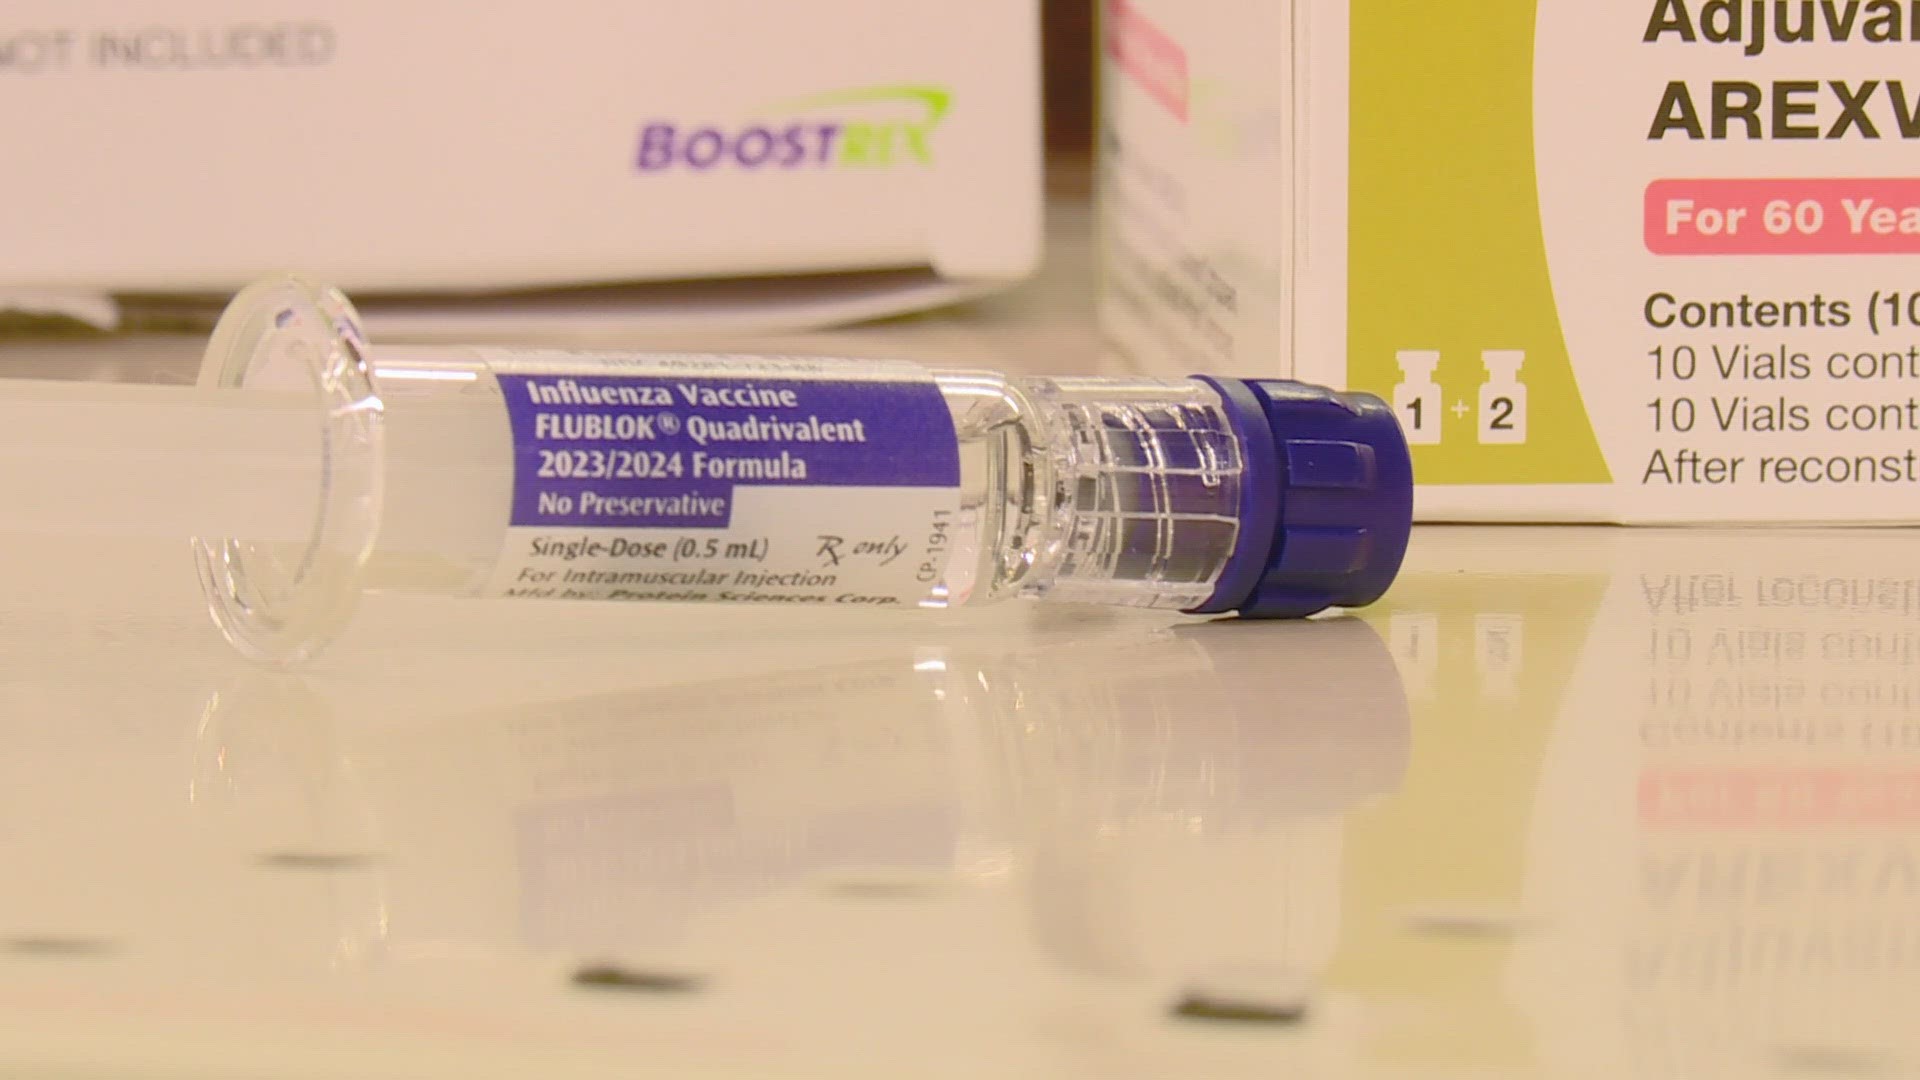 As people flock to pharmacies for the latest COVID booster and flu shot, the CDC says more pregnant people say they're hesitant to get recommended immunizations.